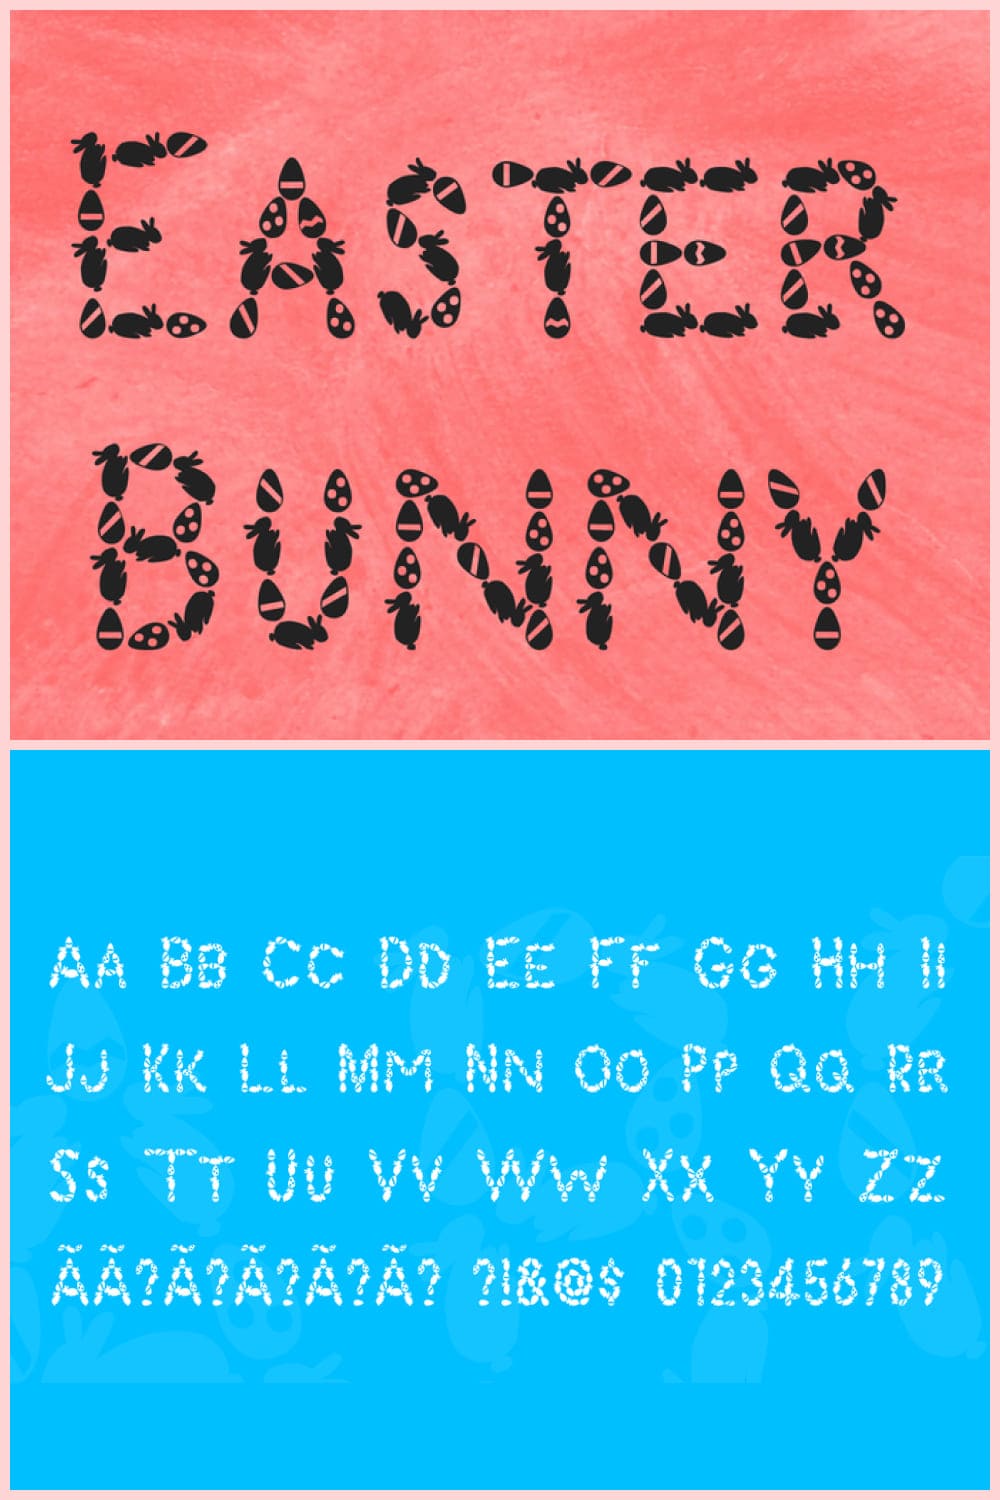 Letters made up of rabbits and eggs on a red and blue background.